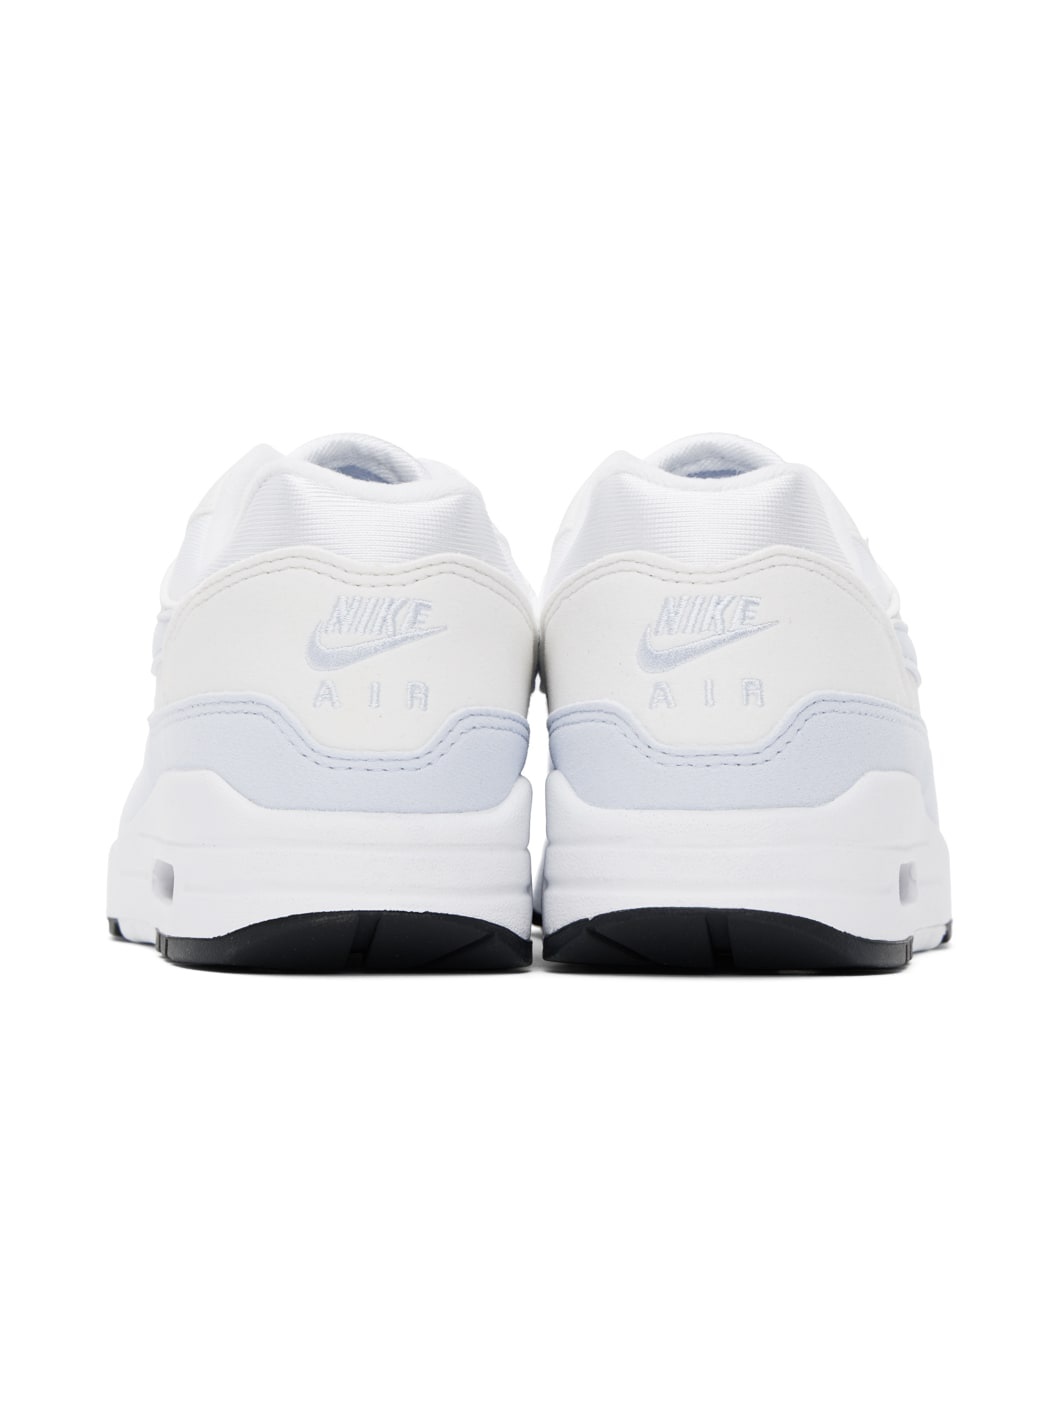 White & Blue Air Max 1 Sneakers - 2